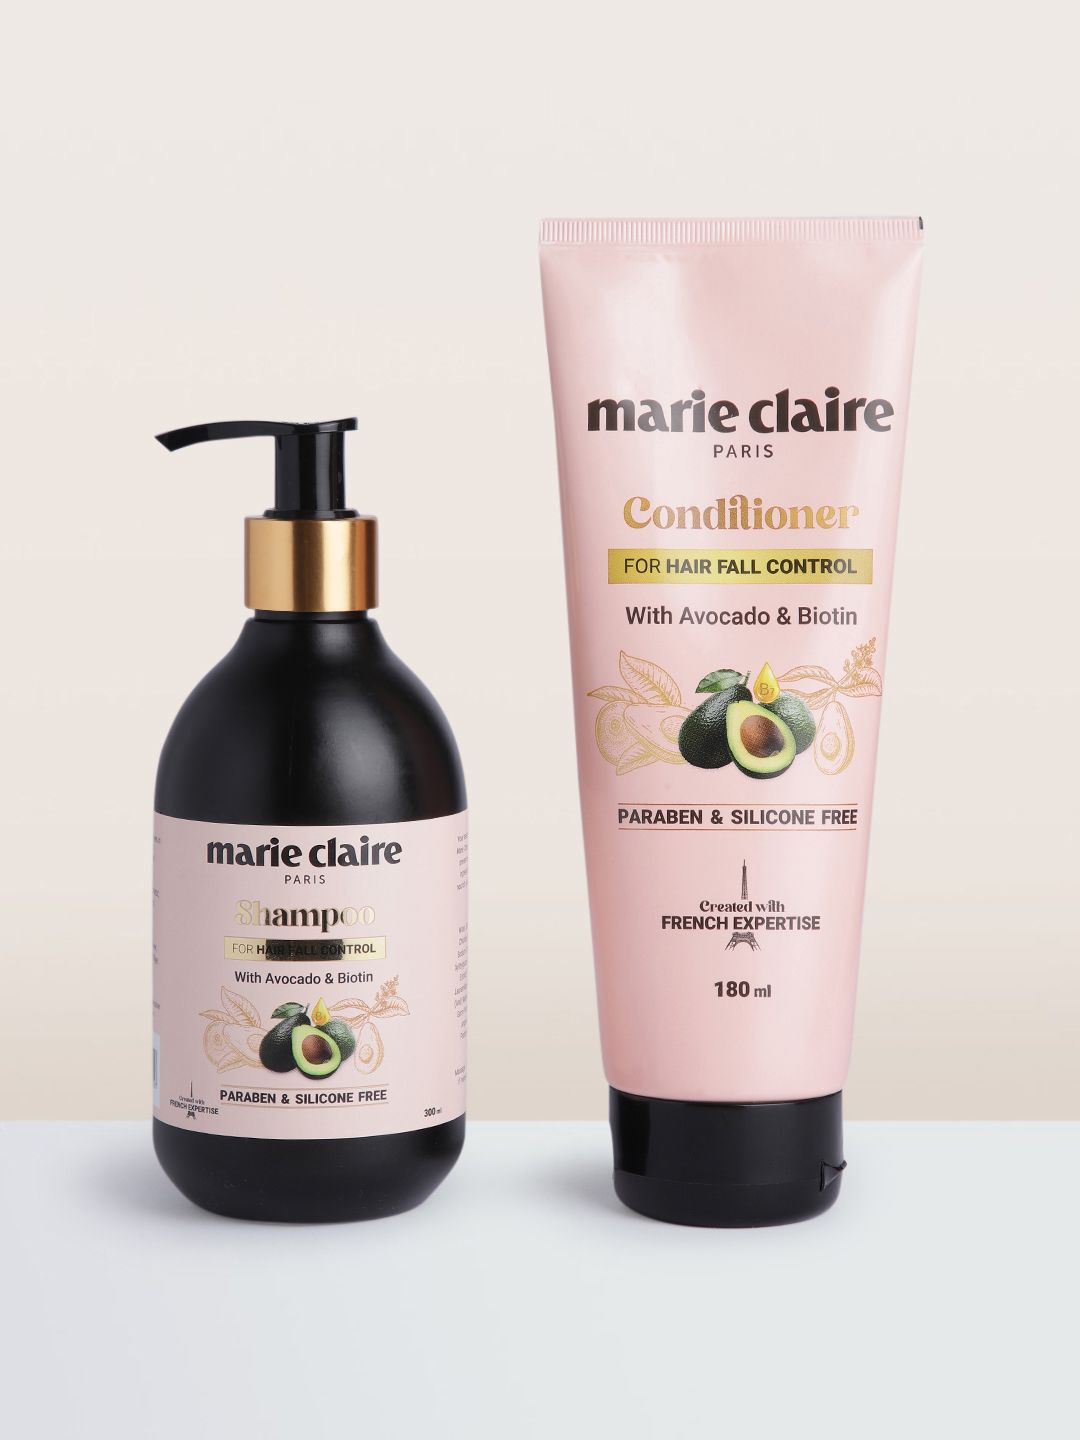 Marie Claire Set of Hair Fall Control Shampoo & Conditioner with Avocado & Biotin 480 ml Price in India